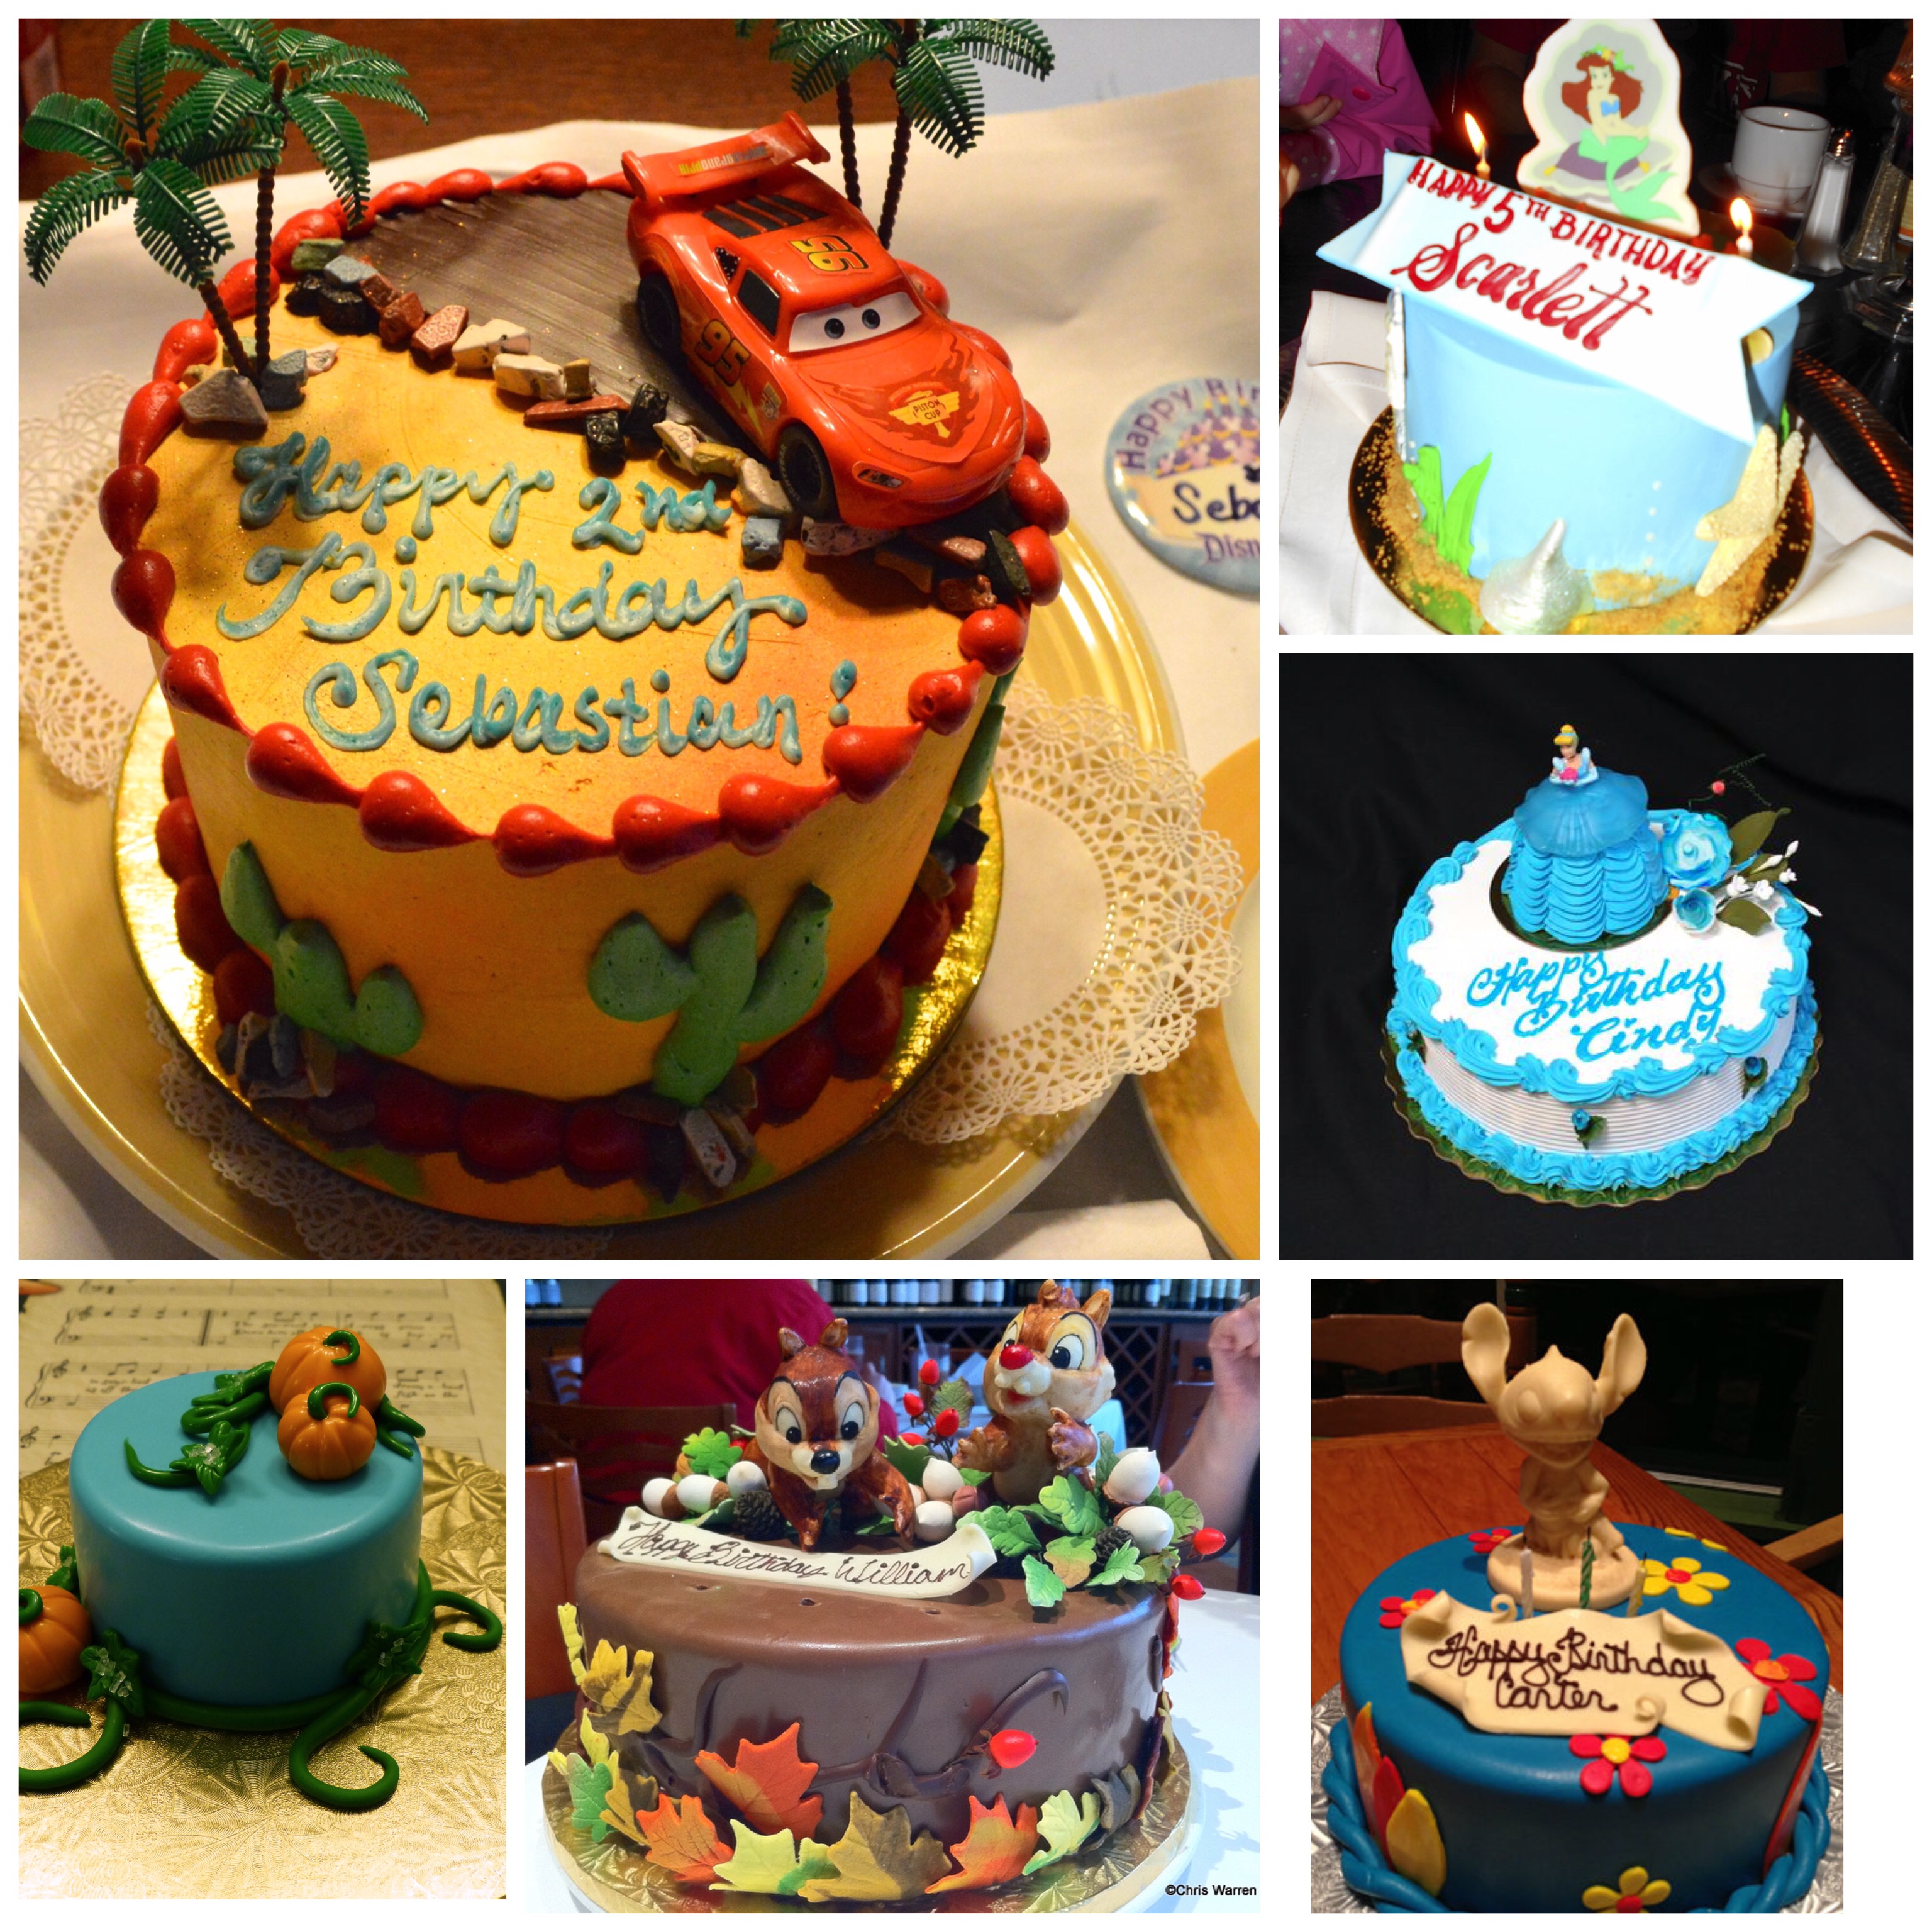 Happy National Cake Decorating Day! Cakes are wonderful for any occasion or  just because - Disneyland Lounge